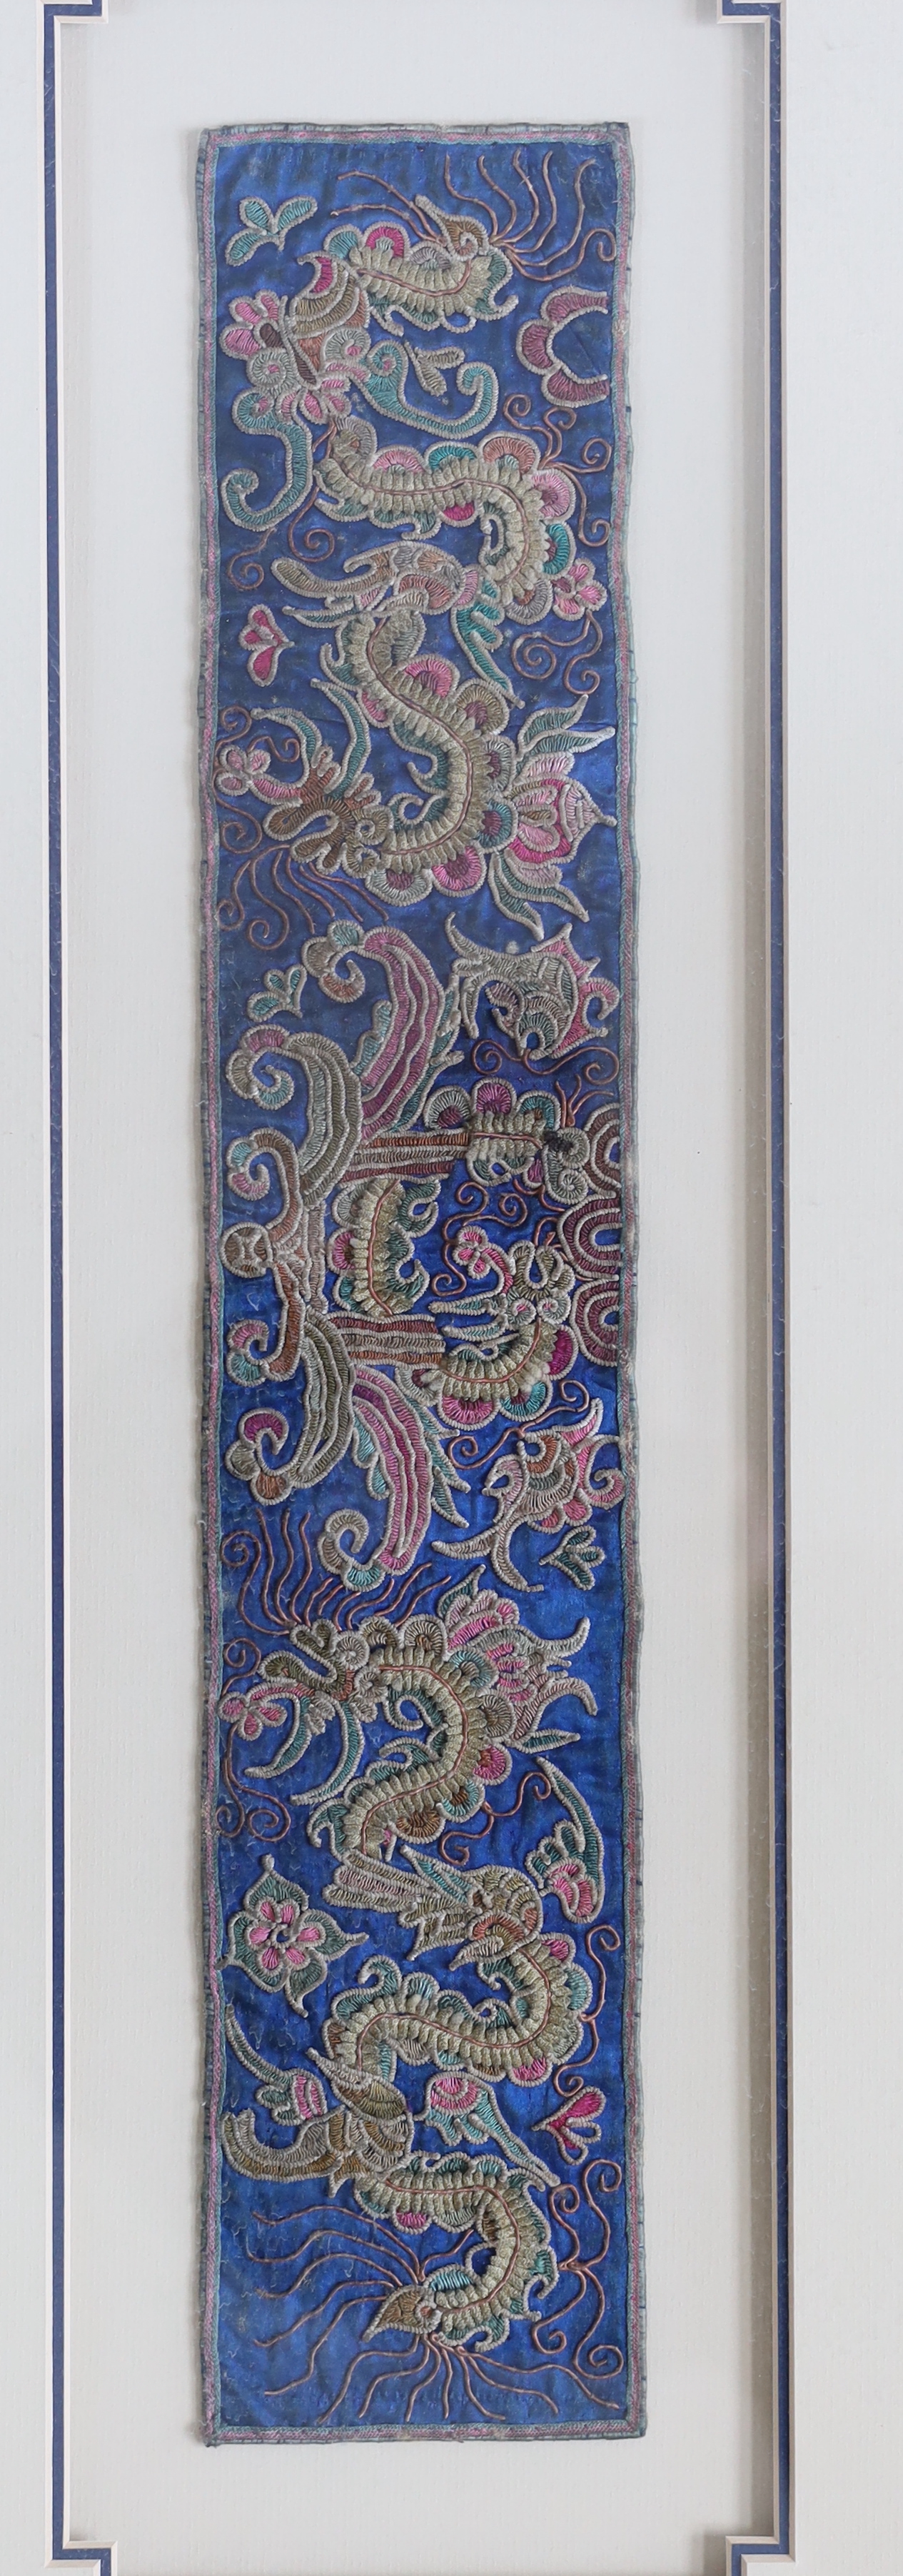 Two 19th century Chinese sleeve bands, embroidered in rich polychromes silks, designed with unusual fine appliqué embroidery, giving the panels a three dimensional effect, largest: 8cm wide, 50cm long